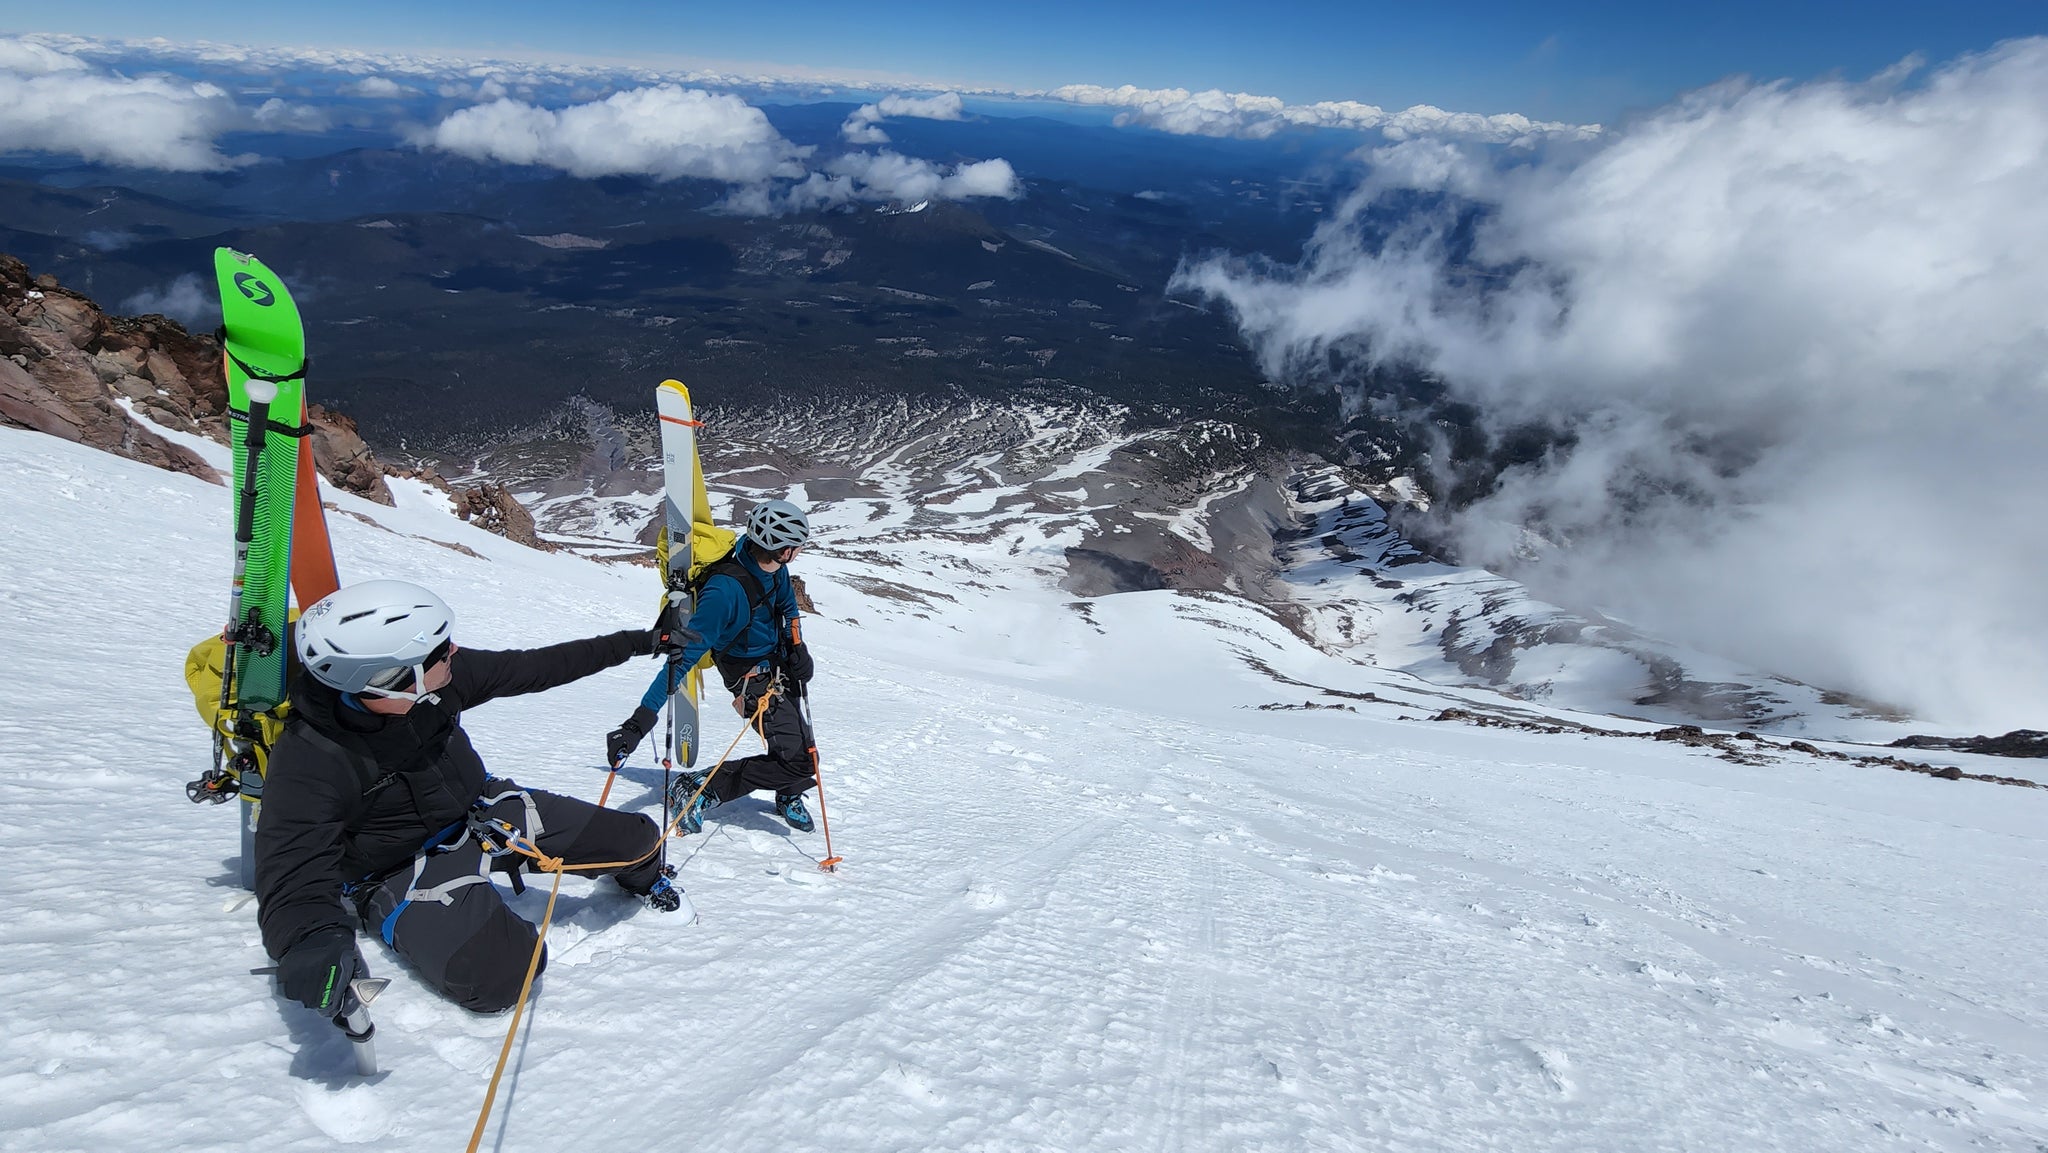 Taking a break after dealing with breakable crust on the climb and summit of Mount Shasta by the Hotlum Wintun Glacier route.